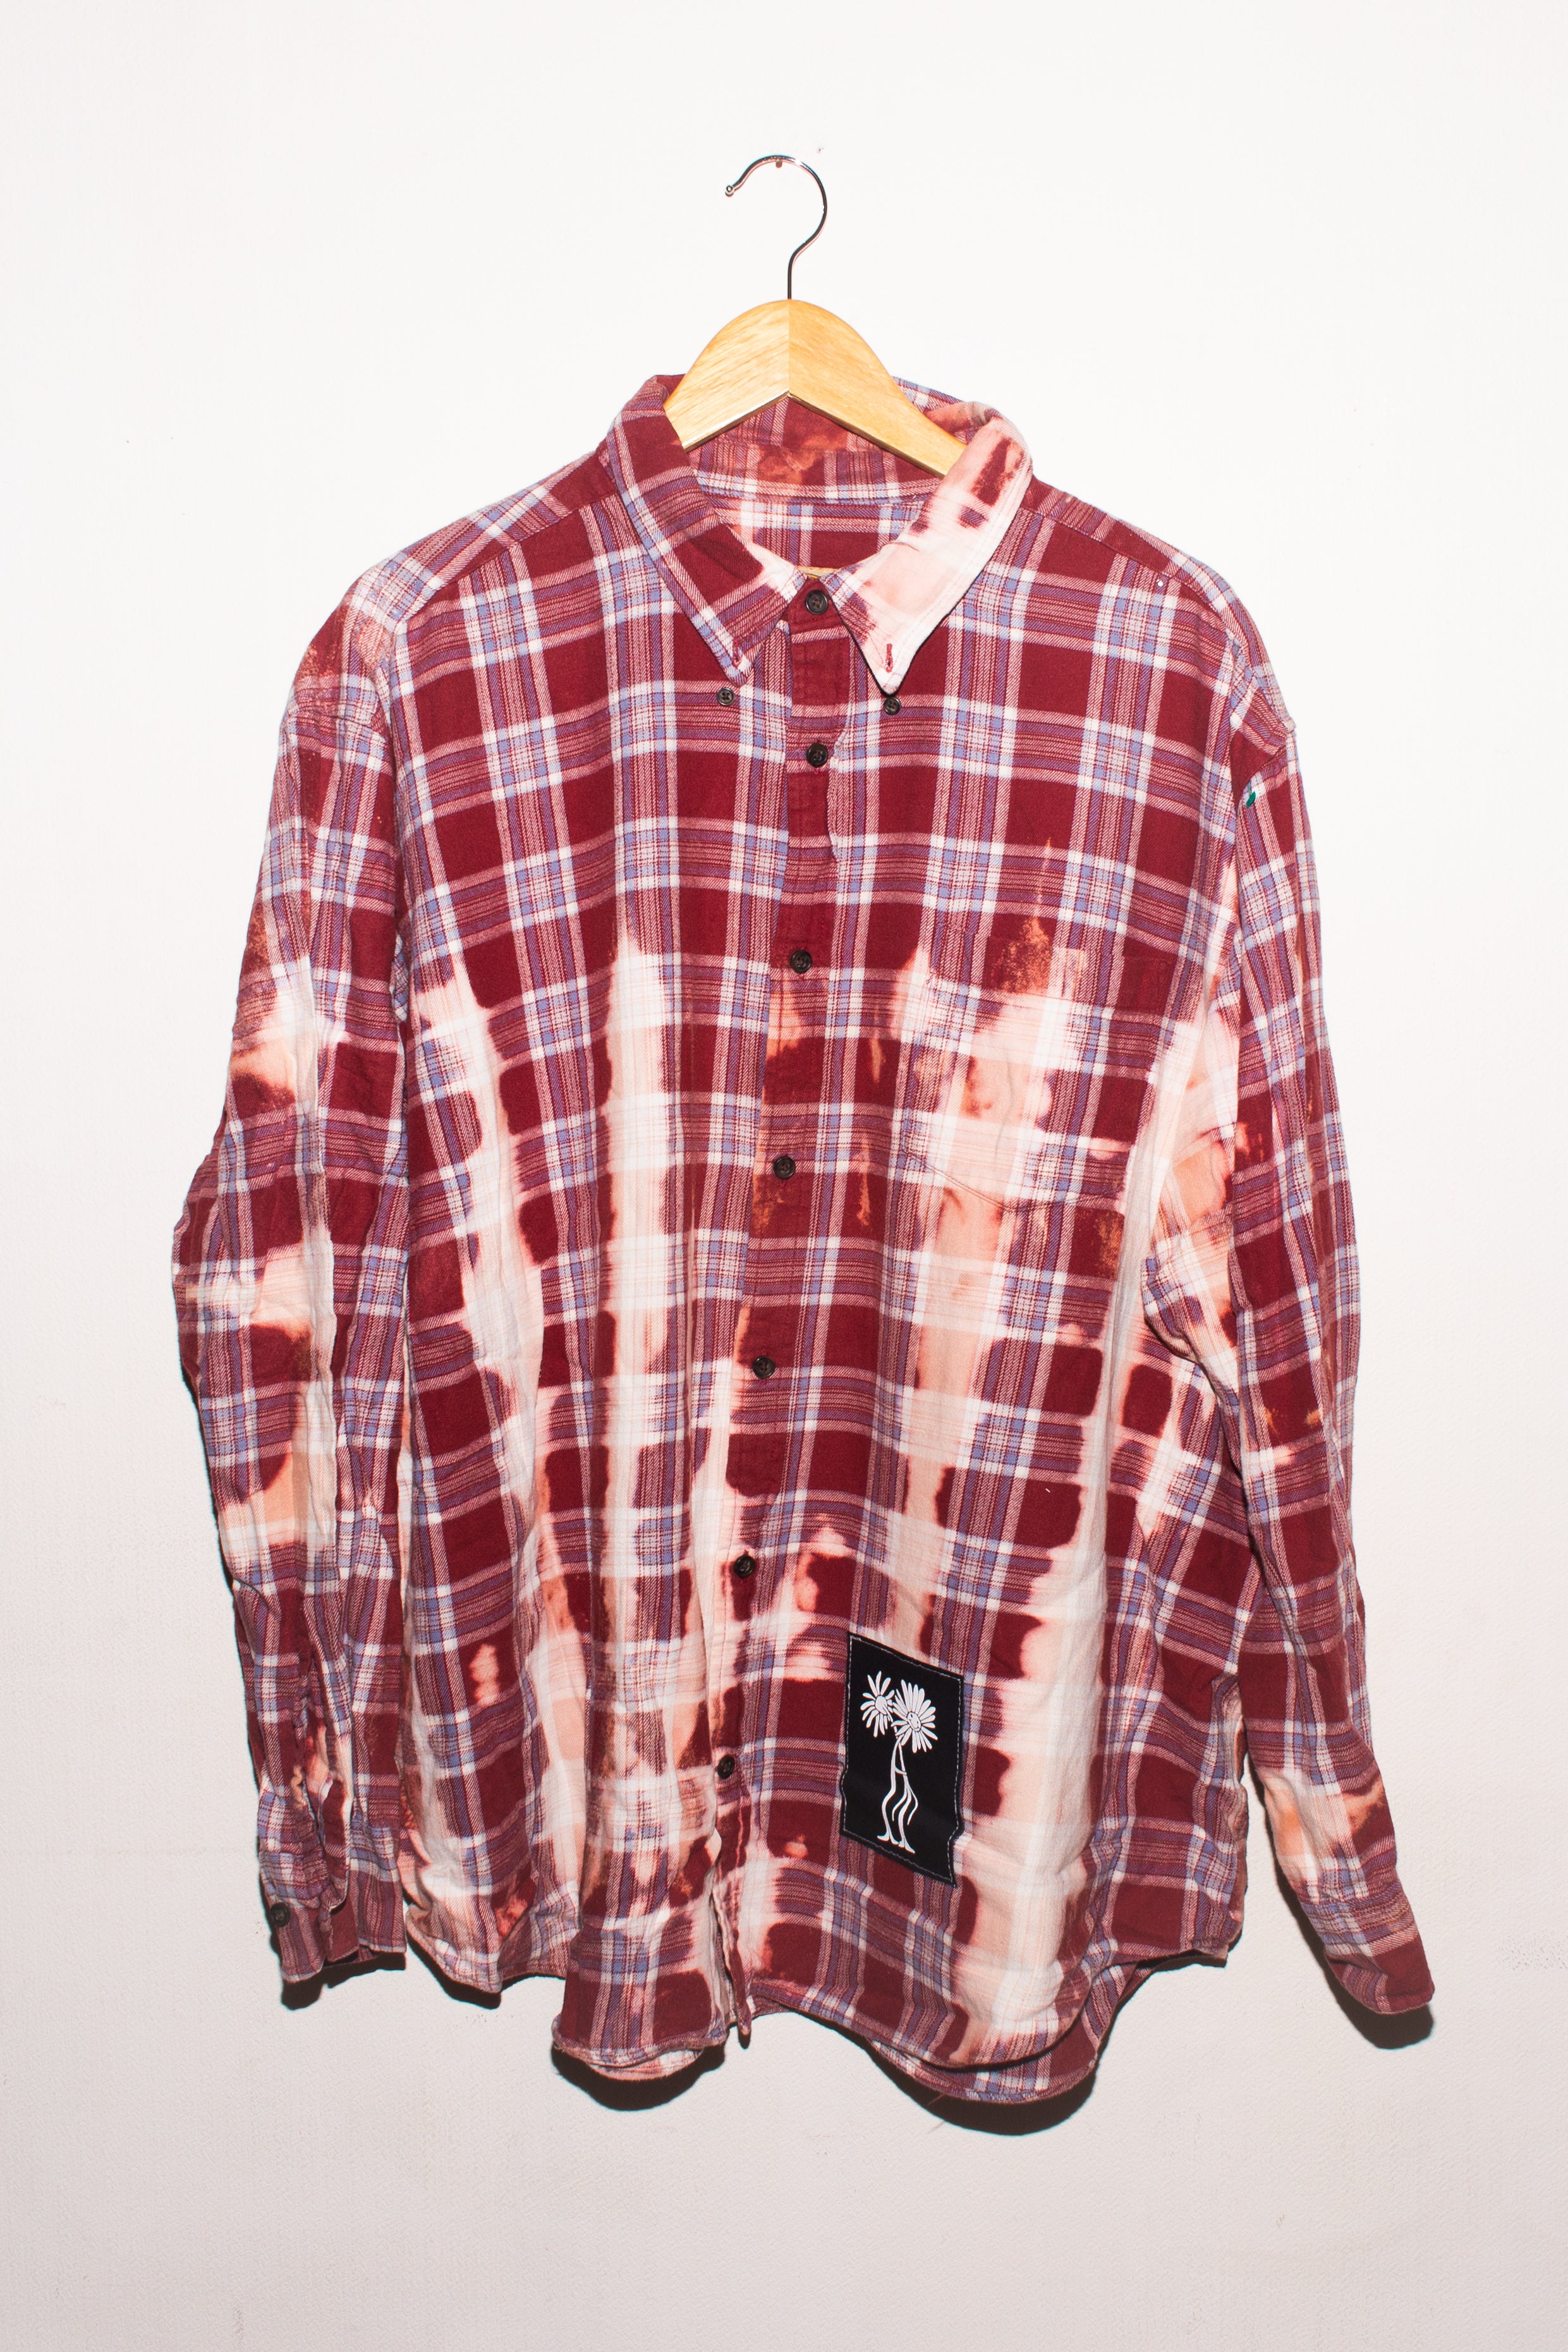 Foundry flannel